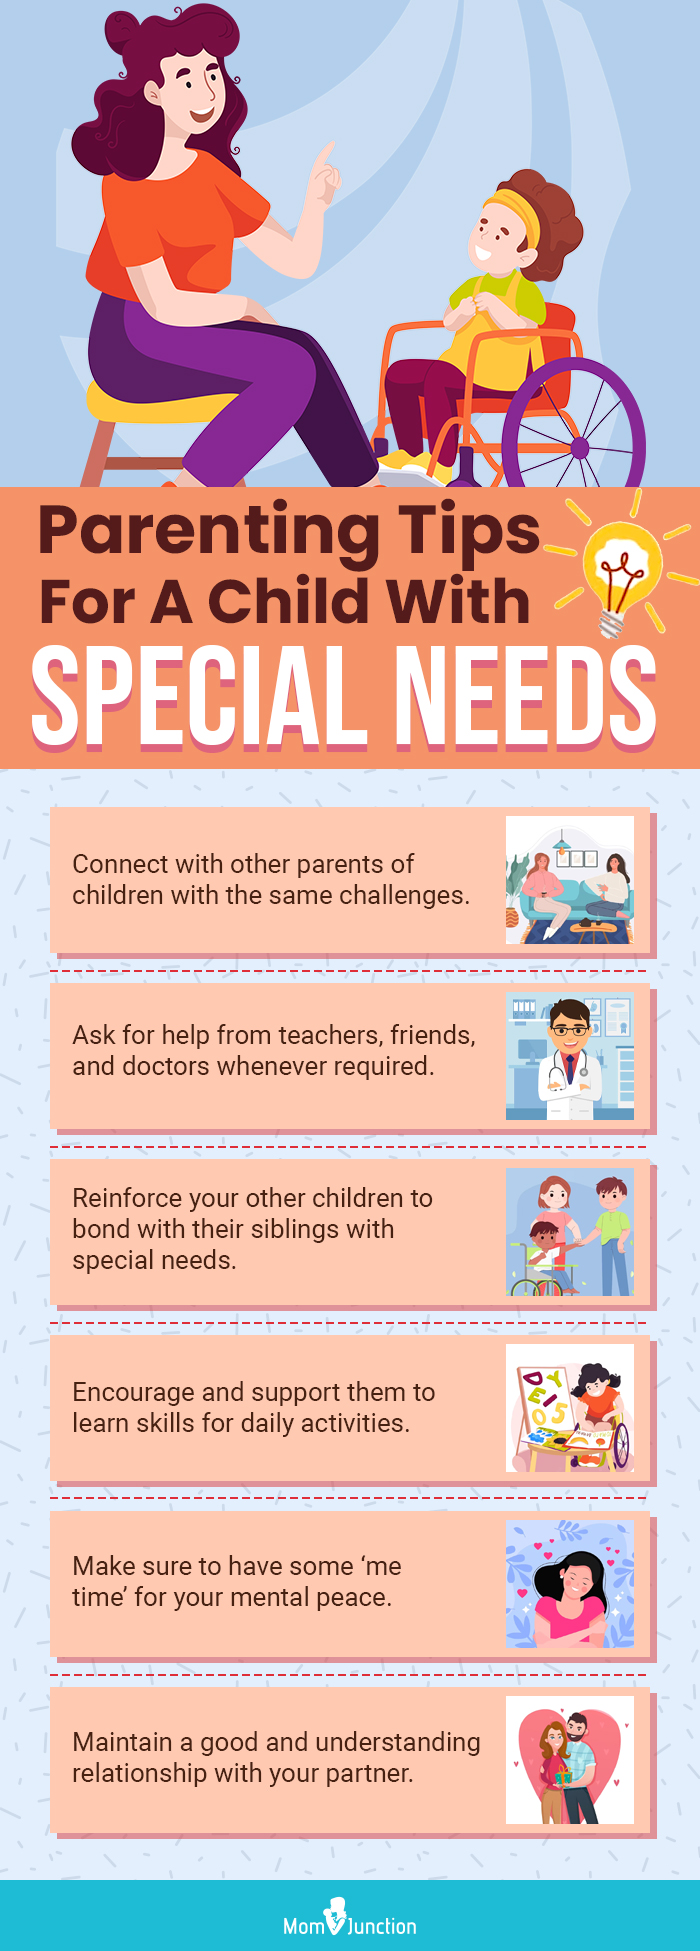 parenting tips for a child with special needs (infographic)